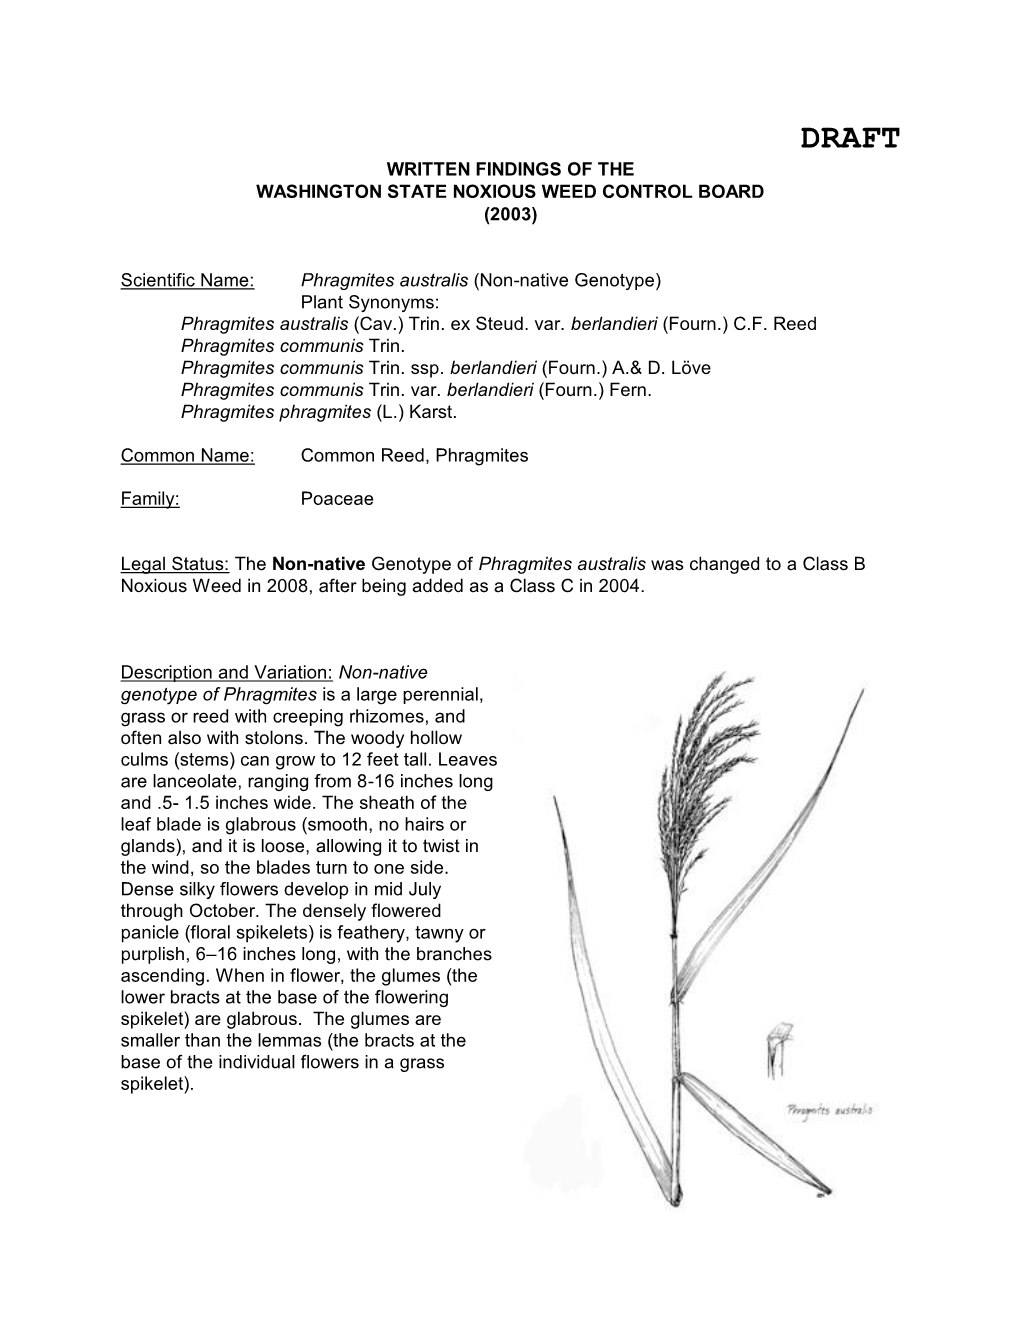 Written Findings of the Washington State Noxious Weed Control Board (2003)